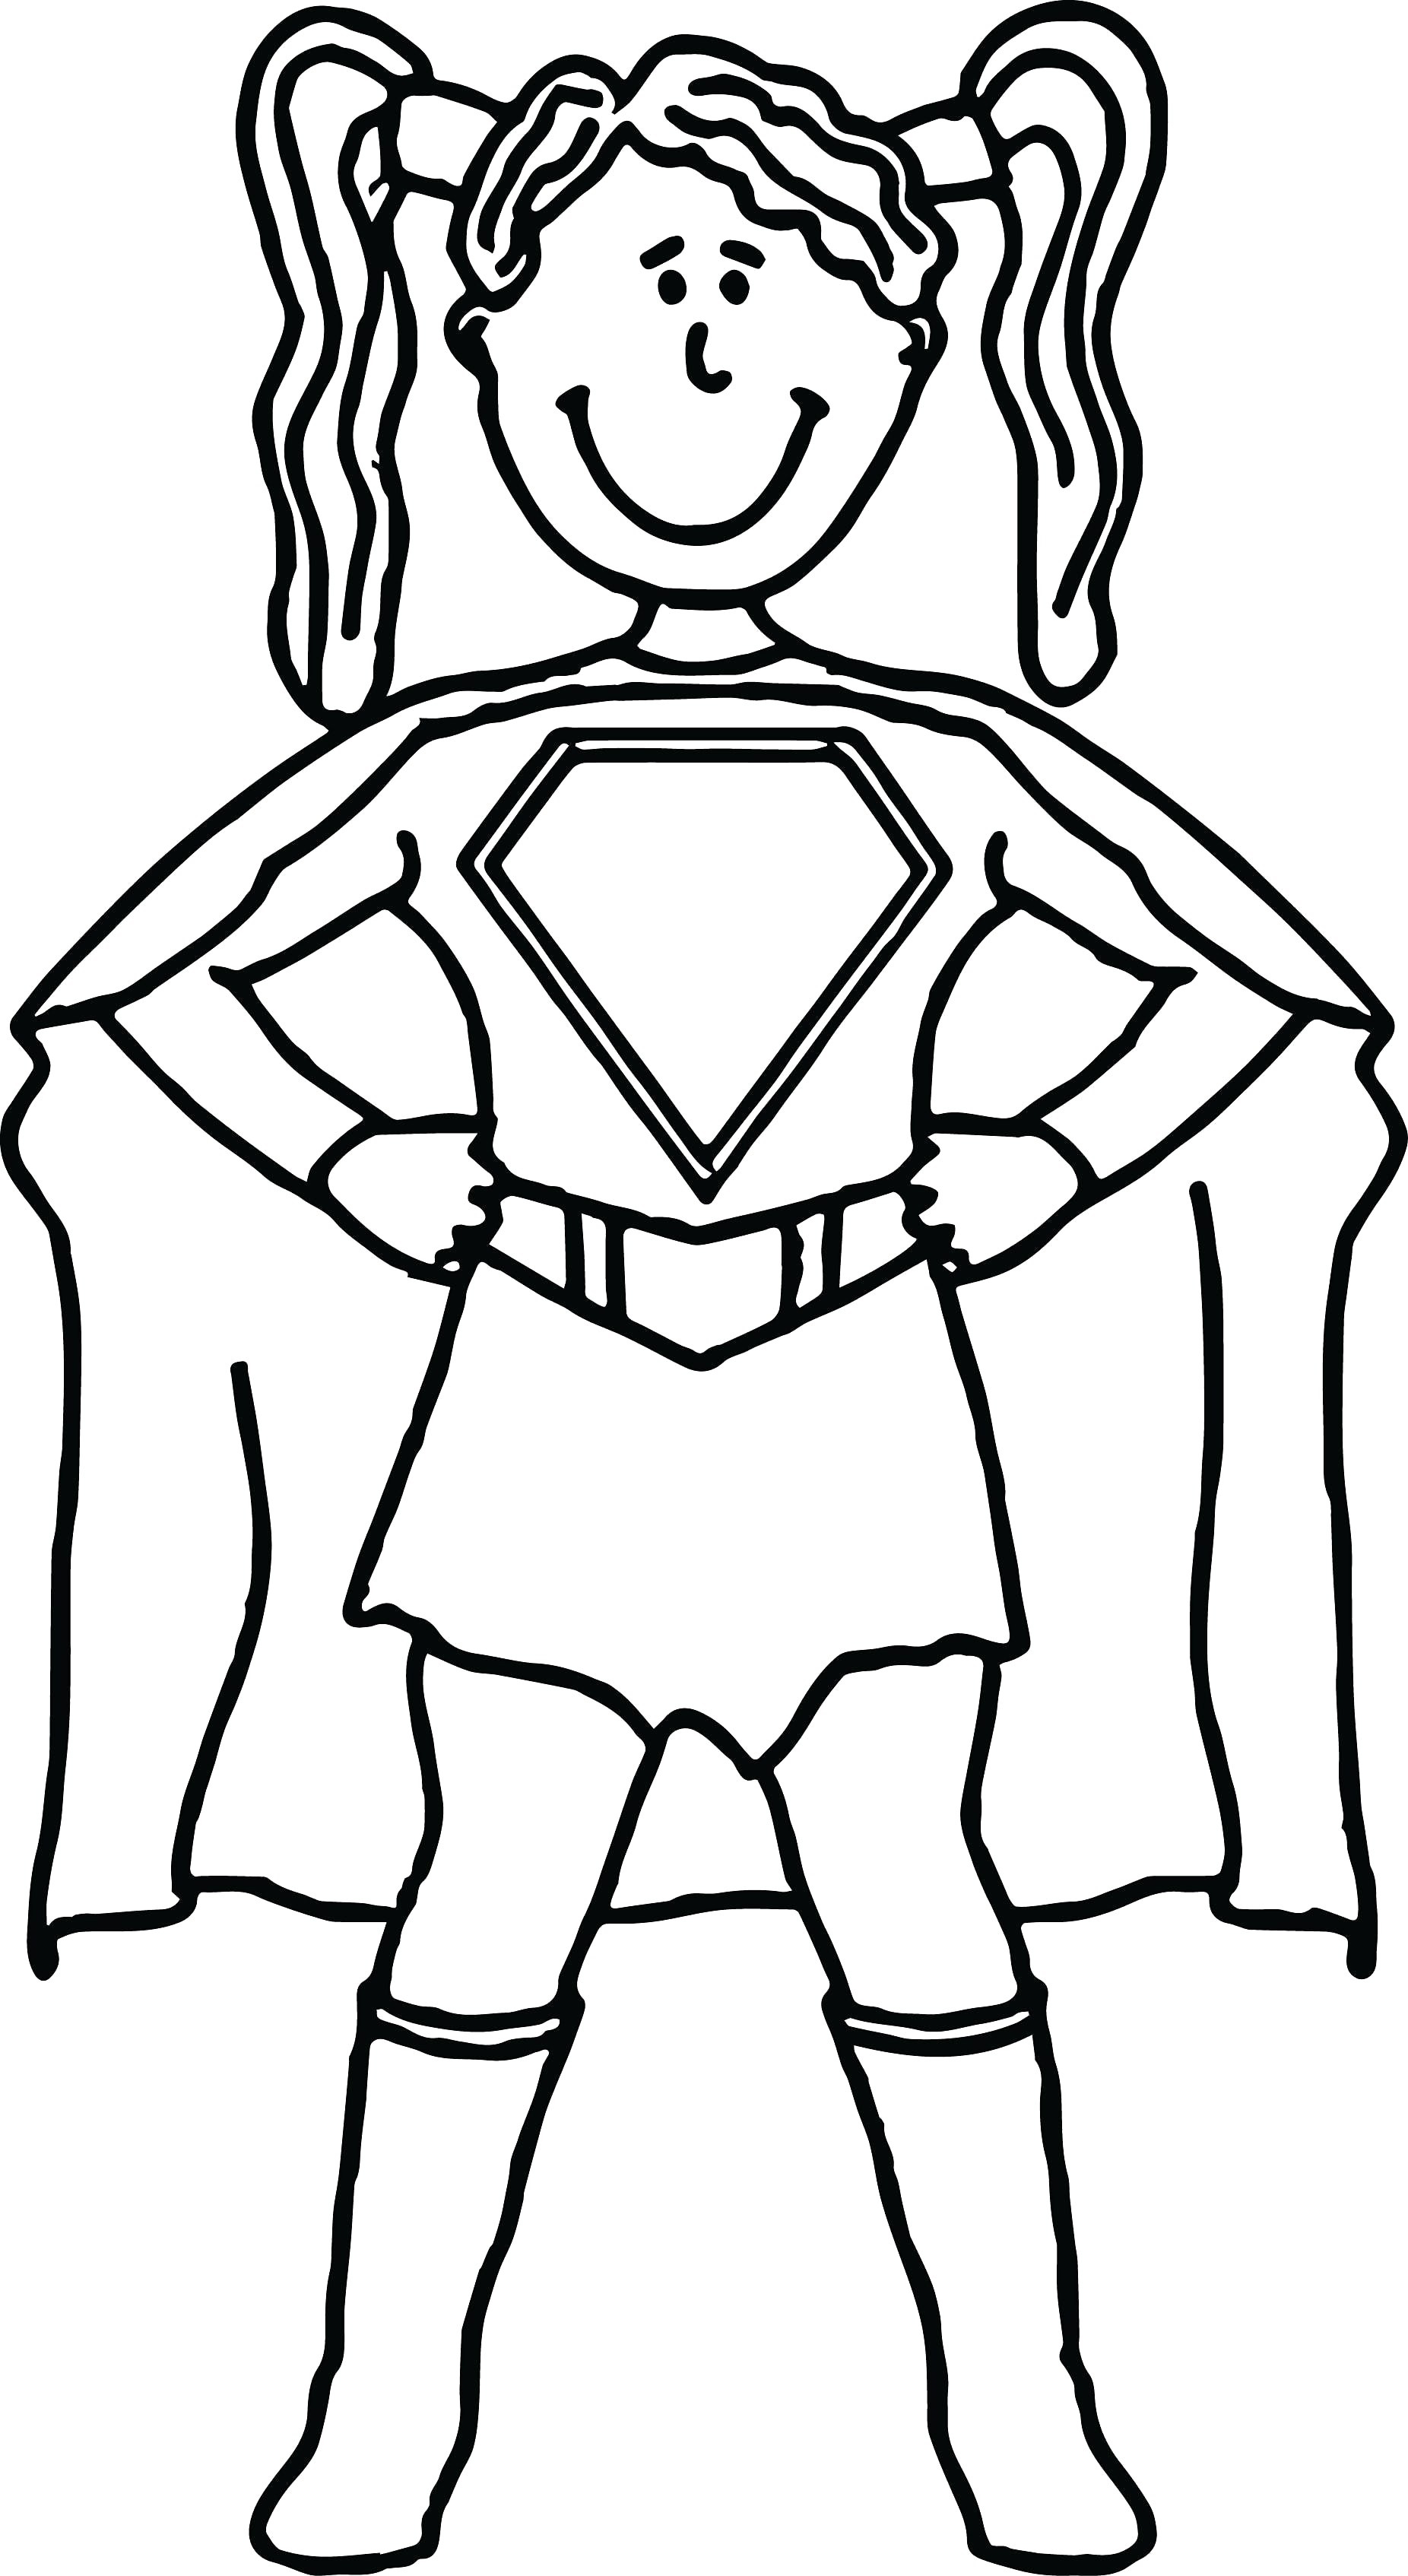 Printable Superhero Coloring Pages